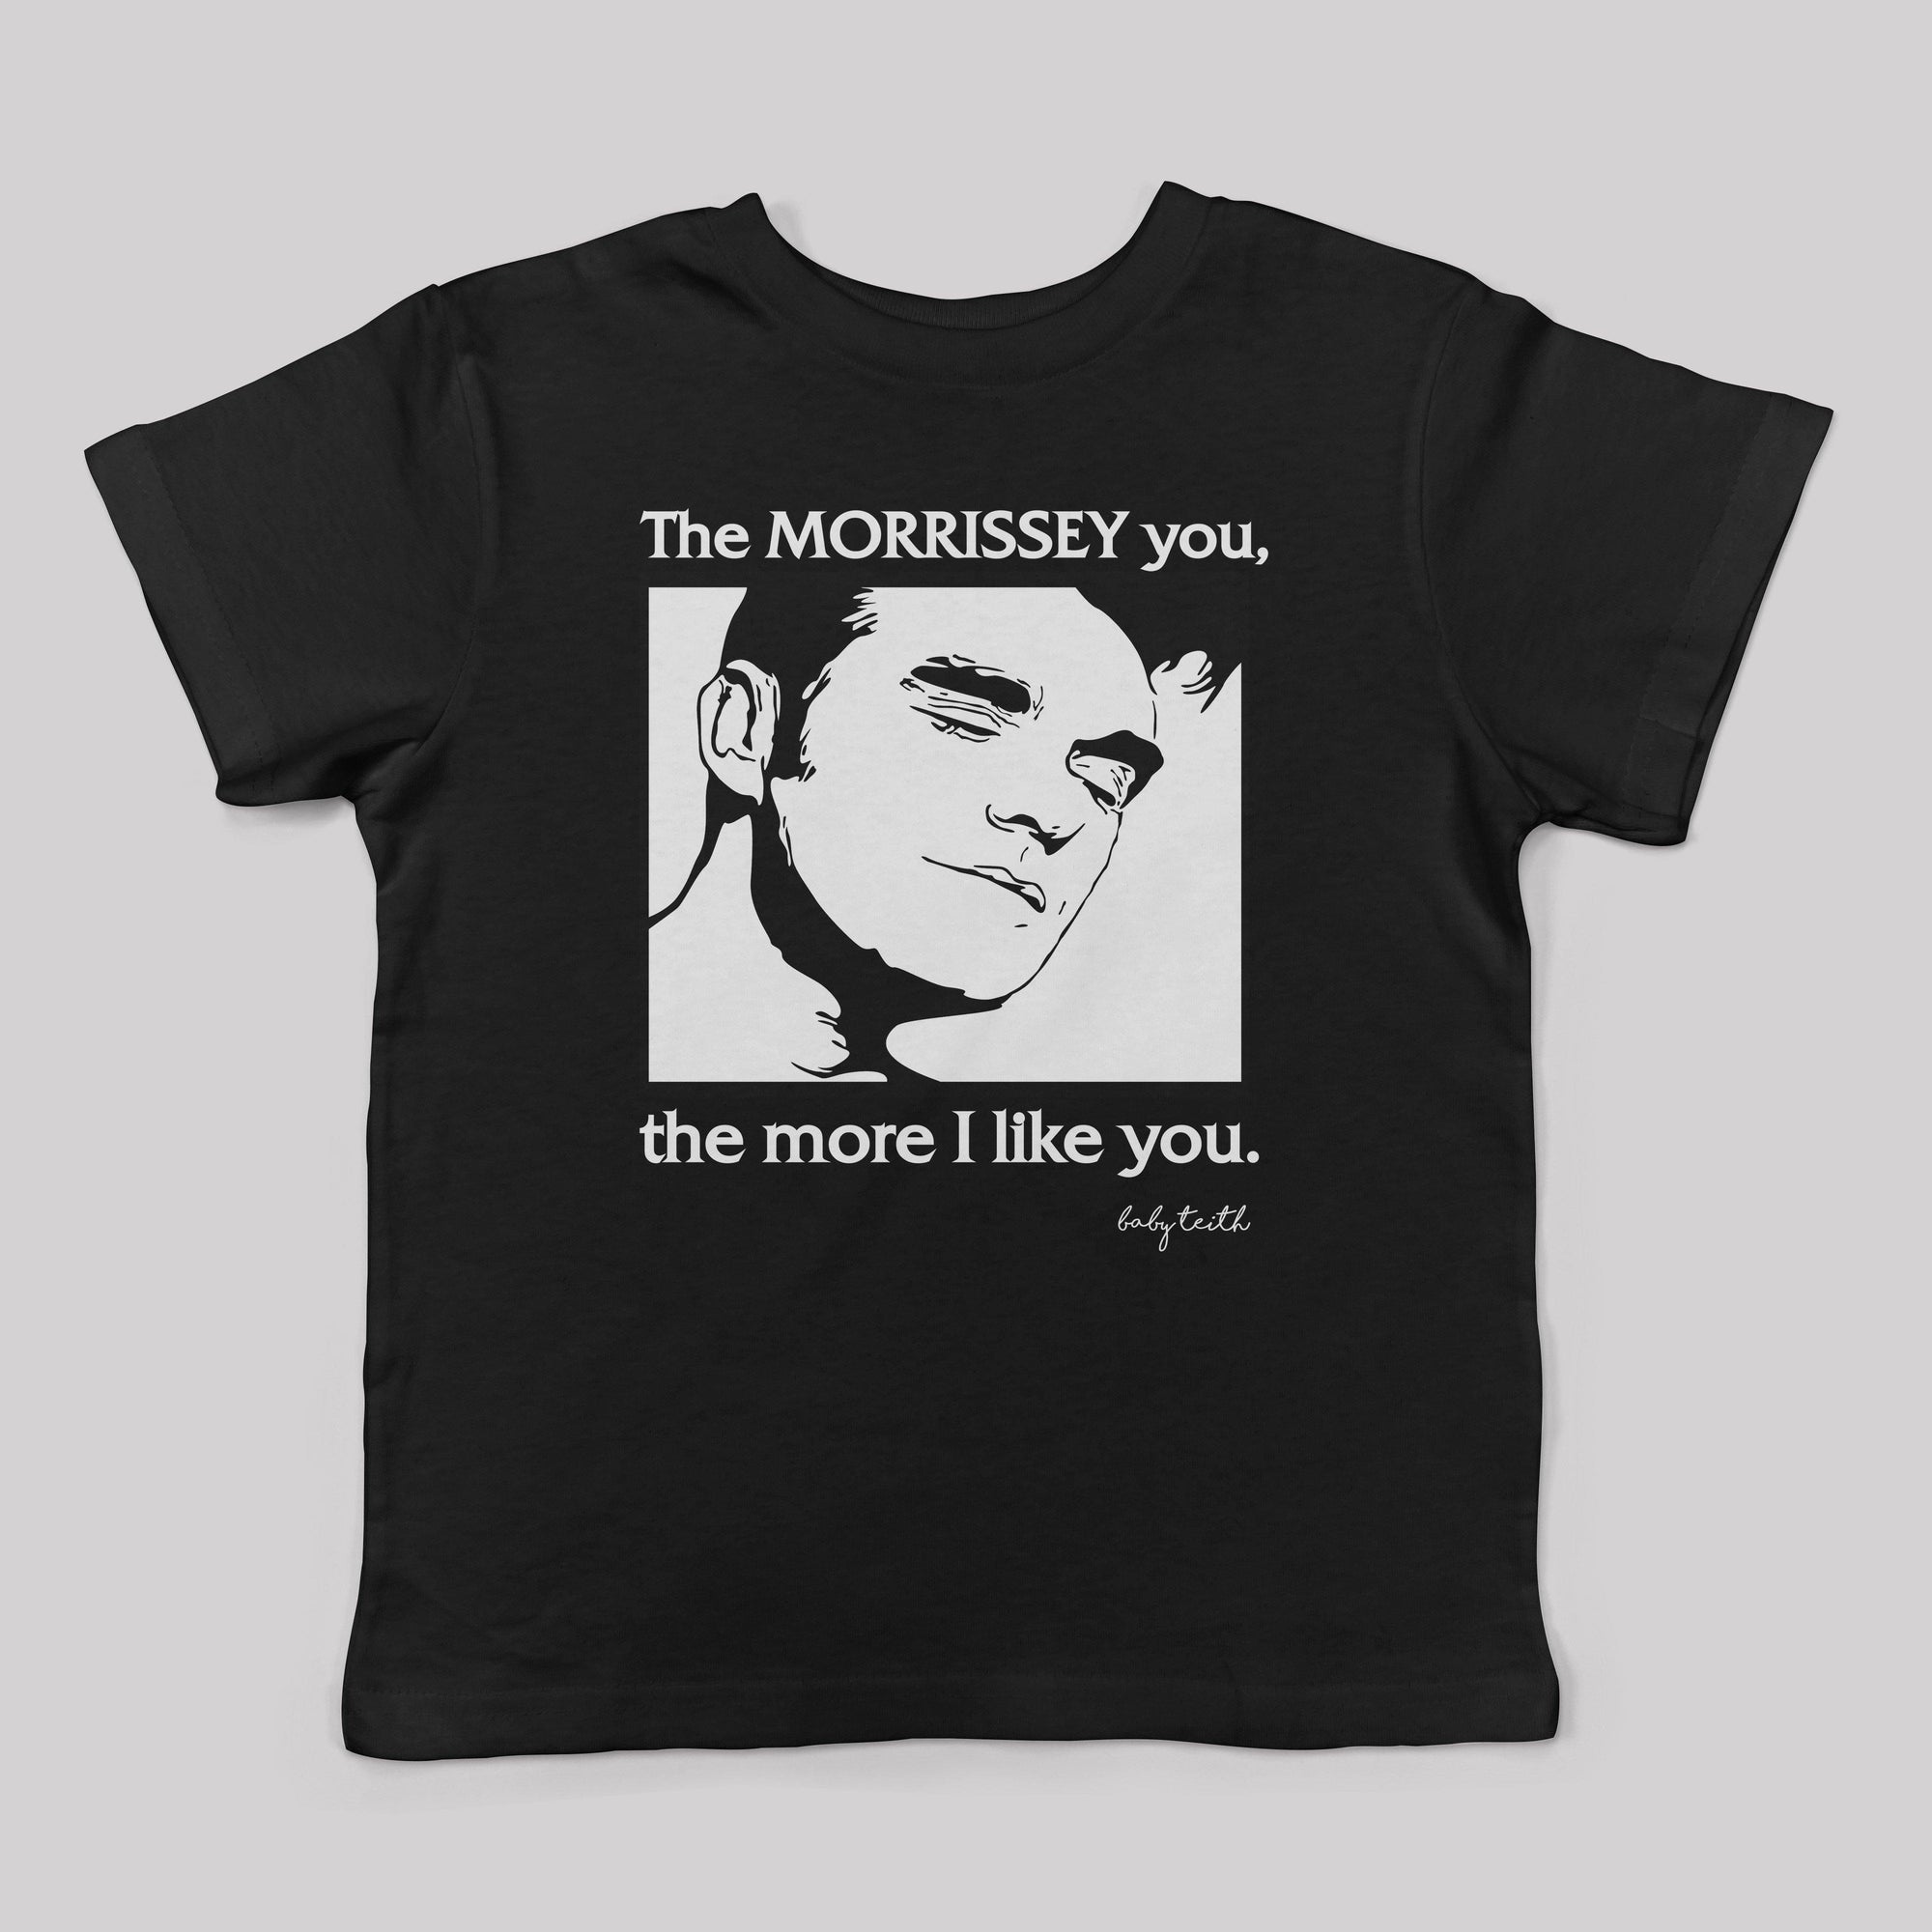 "The Morrissey You the More I like you" Tee for Kids - Baby Teith